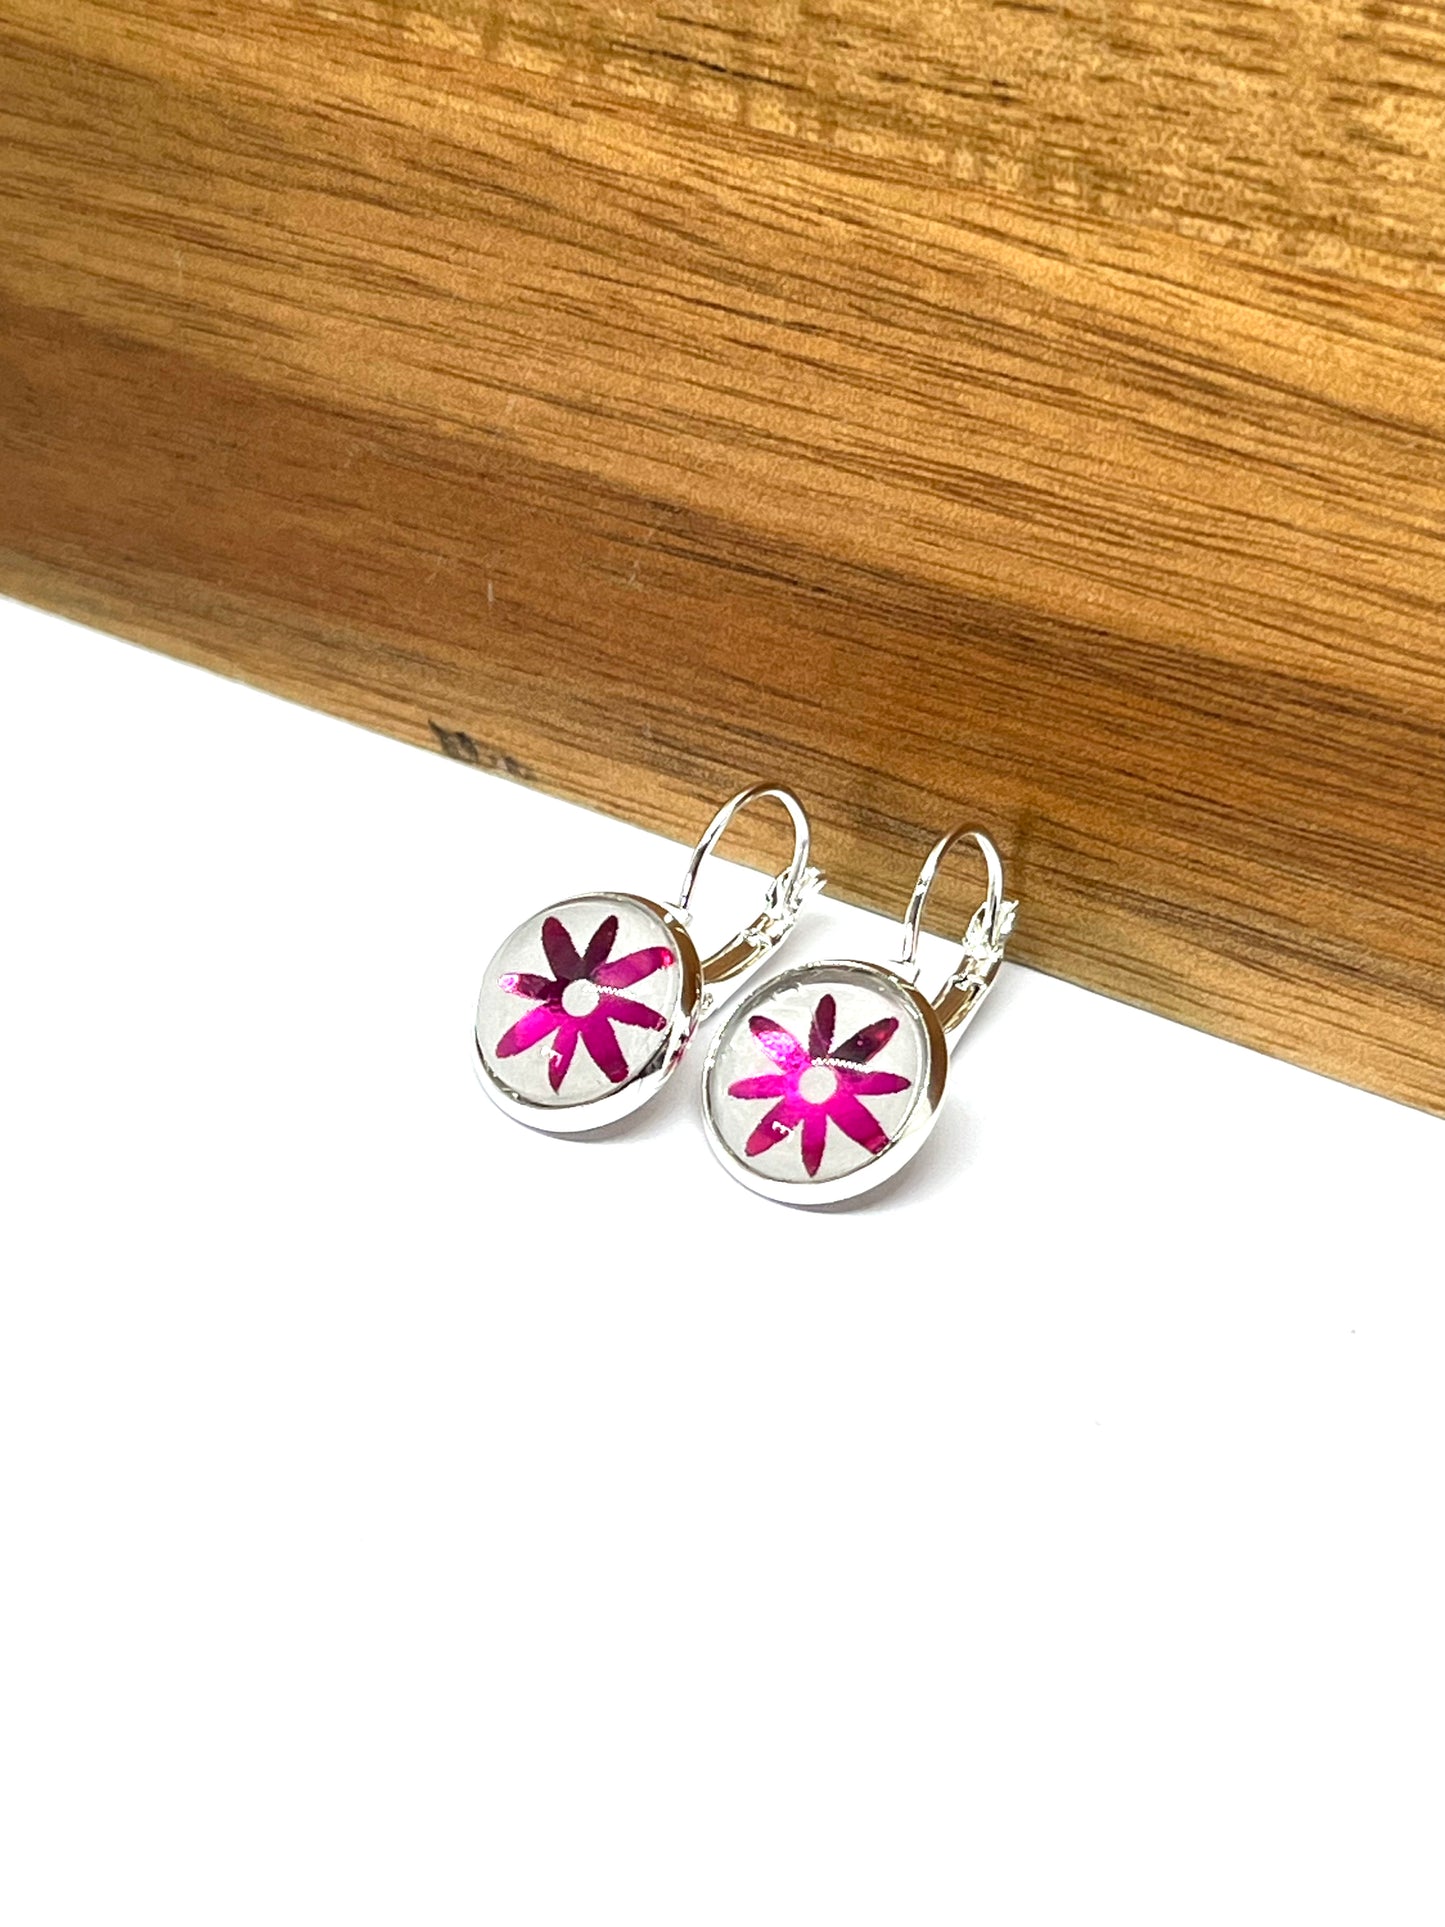 Hot pink daisy glass dome earrings on a dove grey background